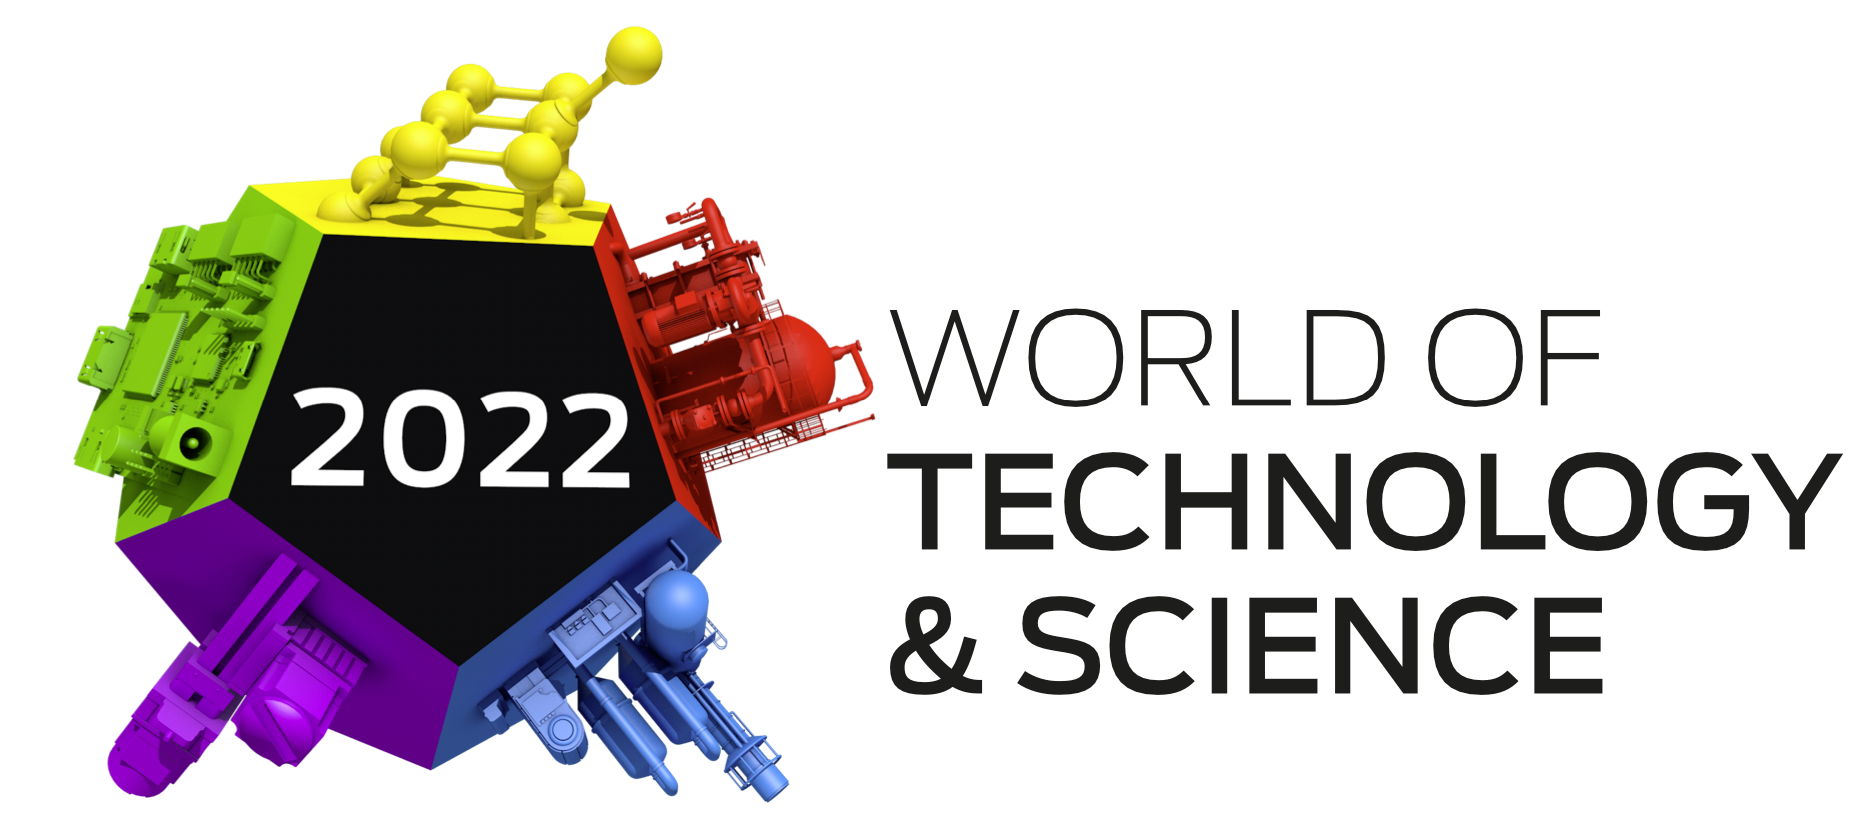 World of Technology & Science 2022